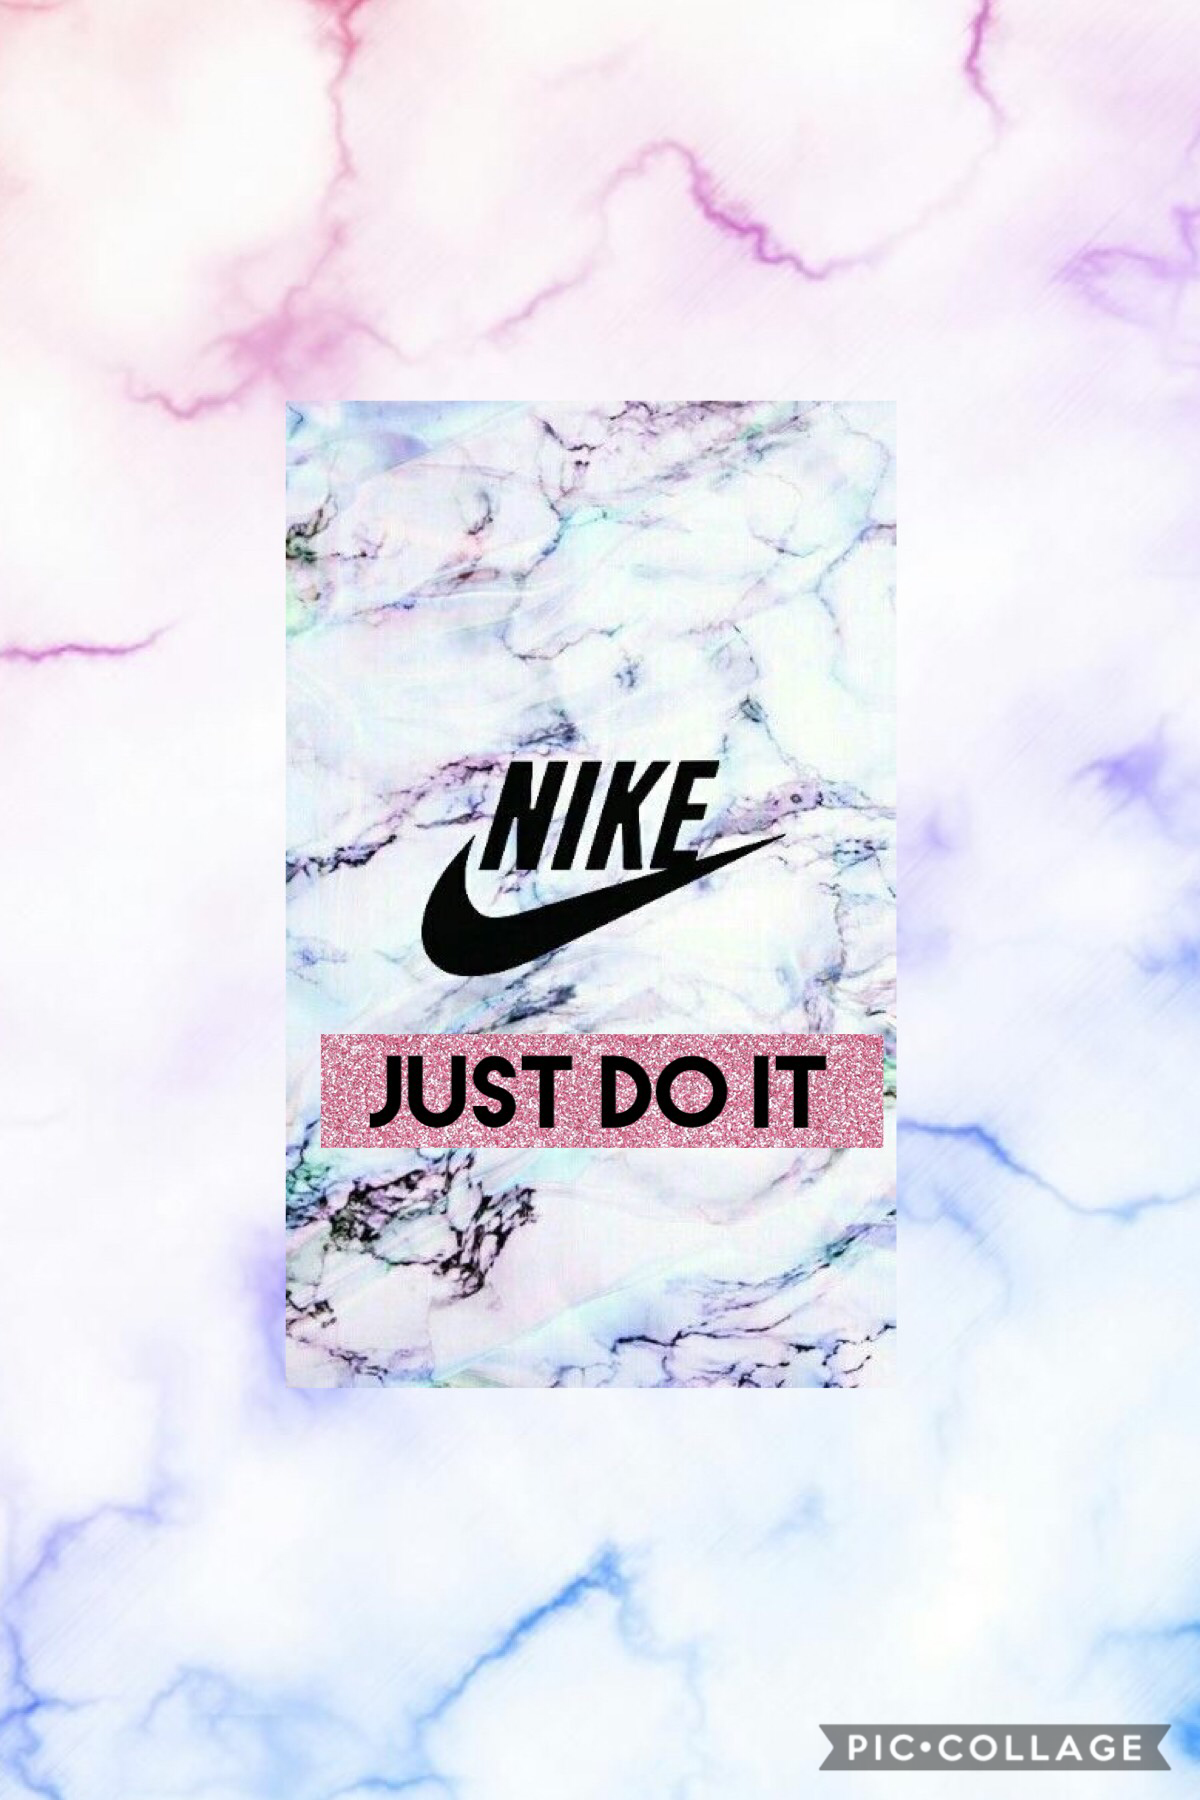 Just decided to do this! #Marble #Nike